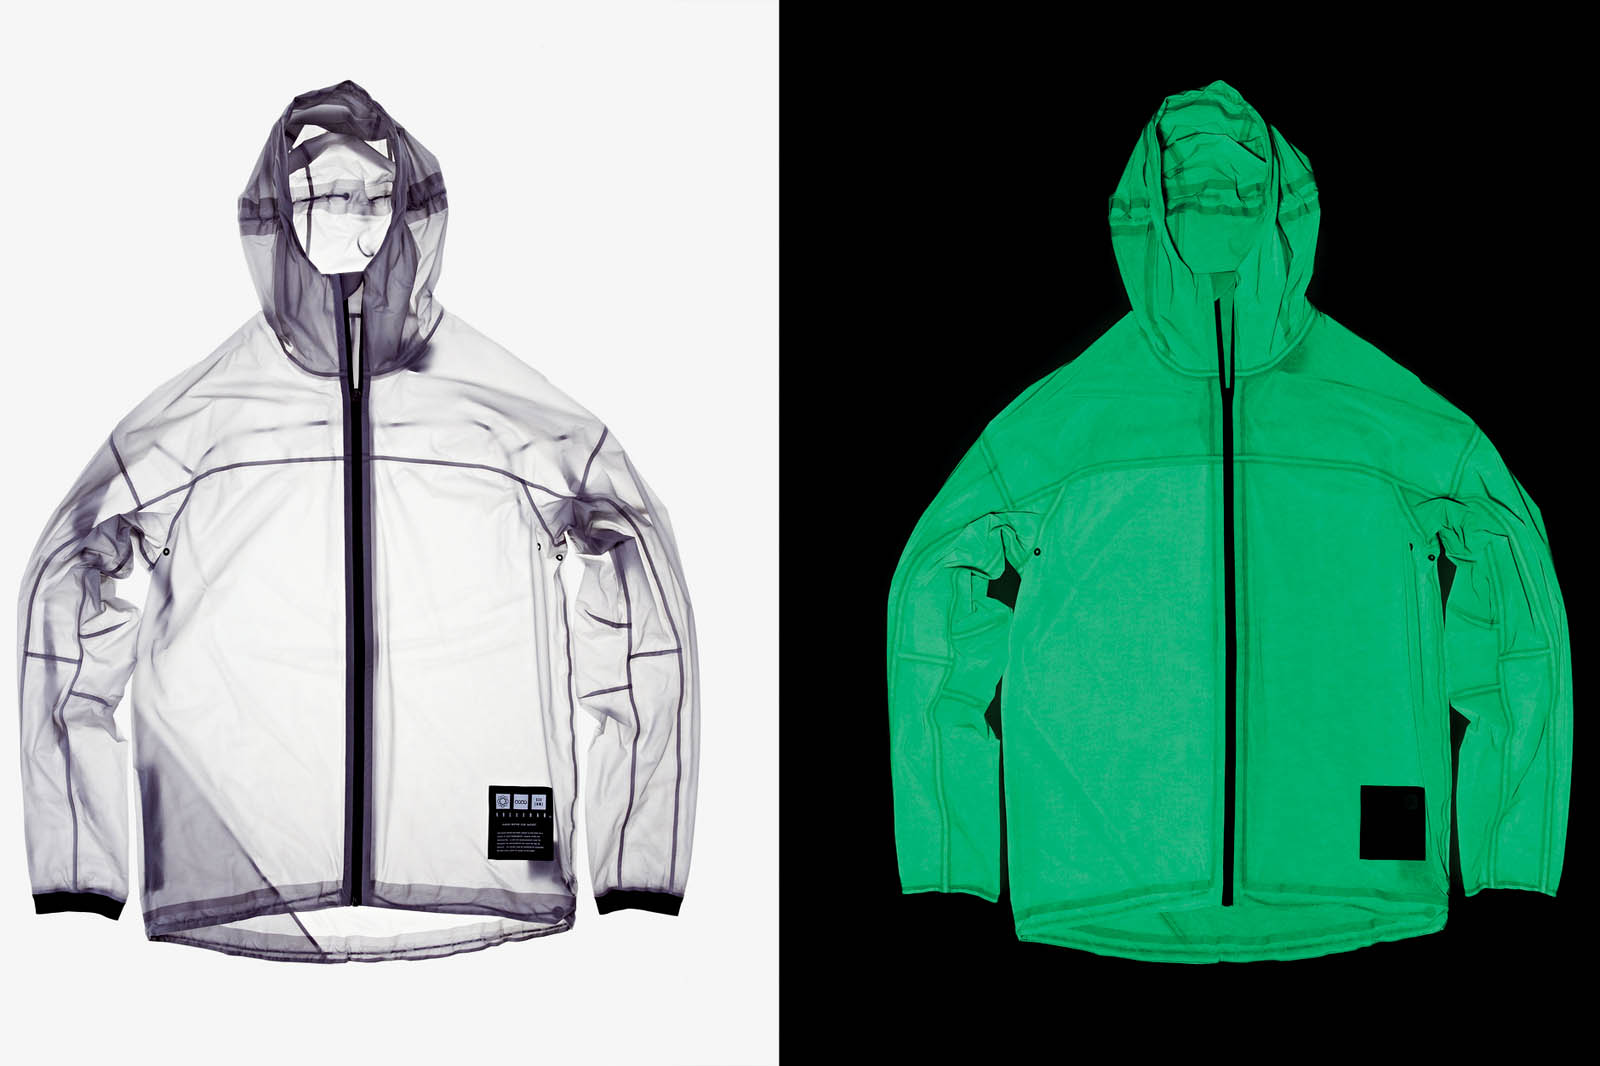 Solar jacket charges itself to glow - Specialty Fabrics Review